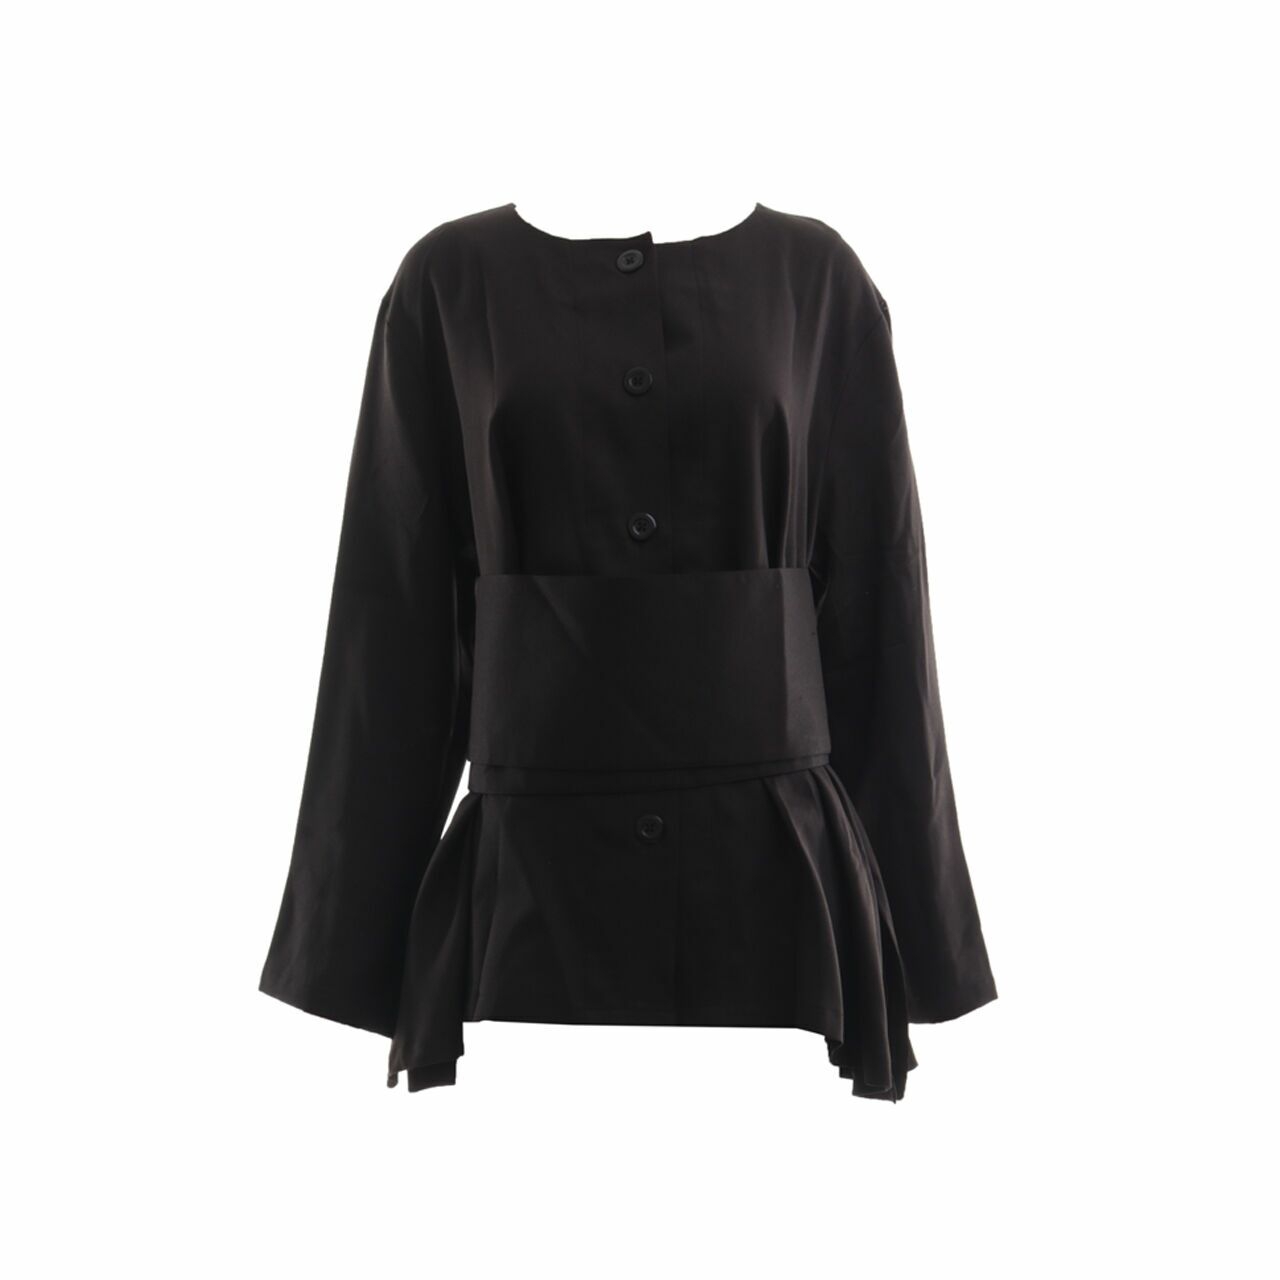 Daily Darling Black Blouse